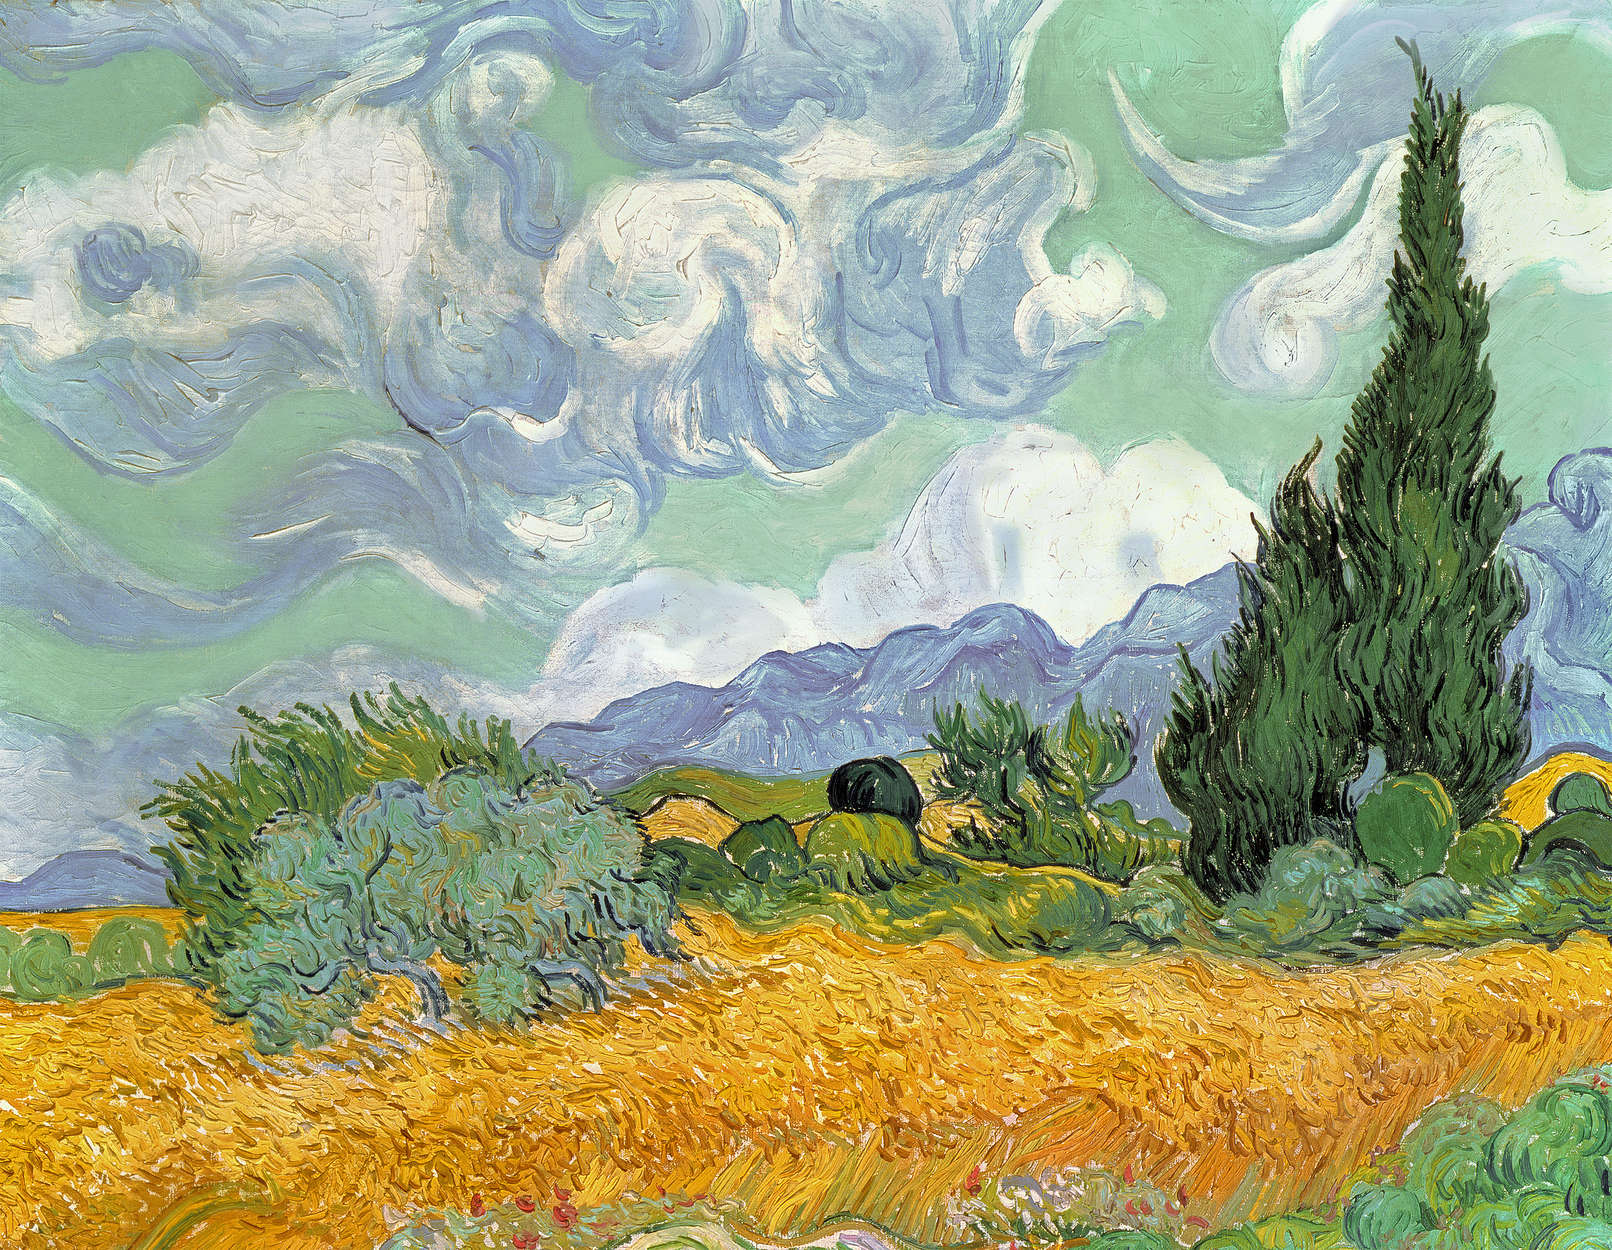             Photo wallpaper "Wheat field with cypresses" by Vincent van Gogh
        